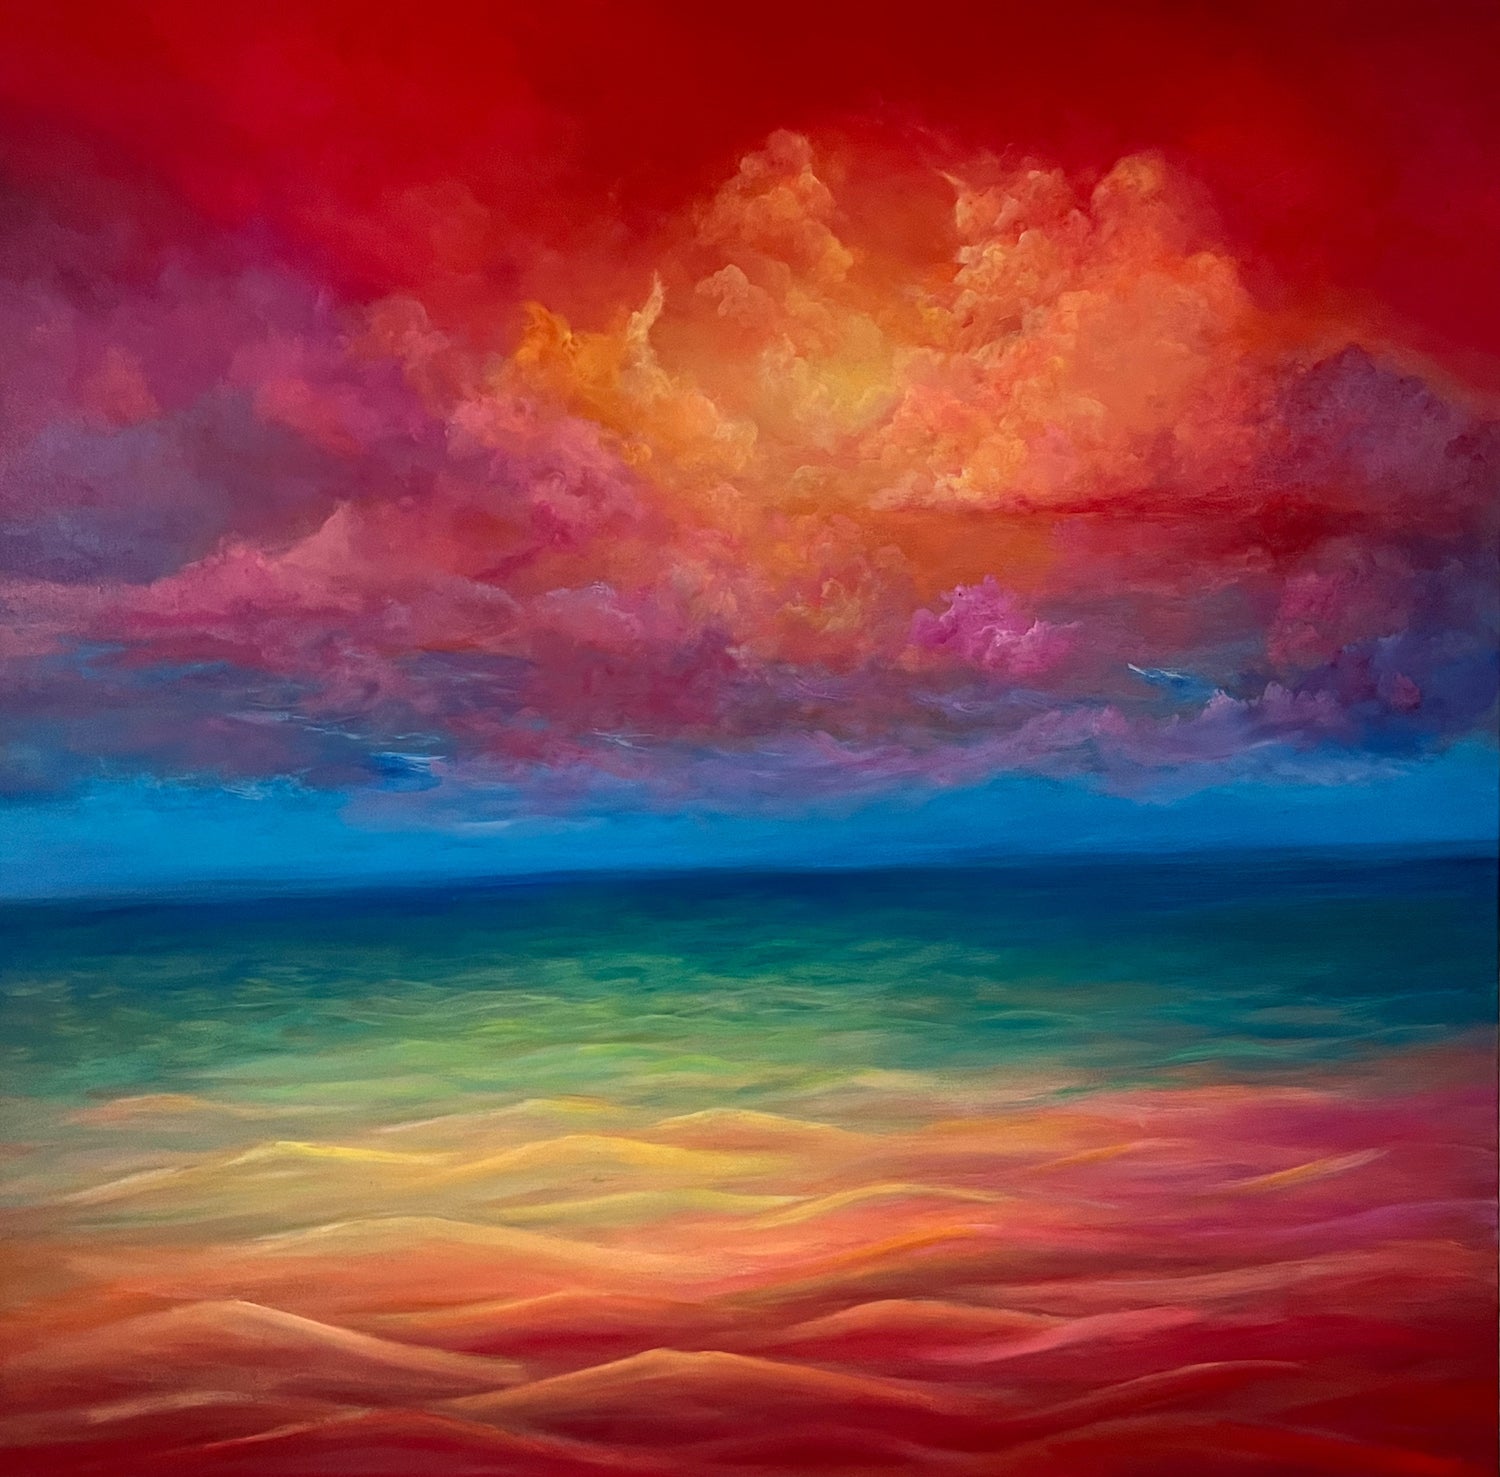 Pure Imagination - EMcBartwork by Ellie McBride Artist from Vermont - Cool Ethereal Paintings 